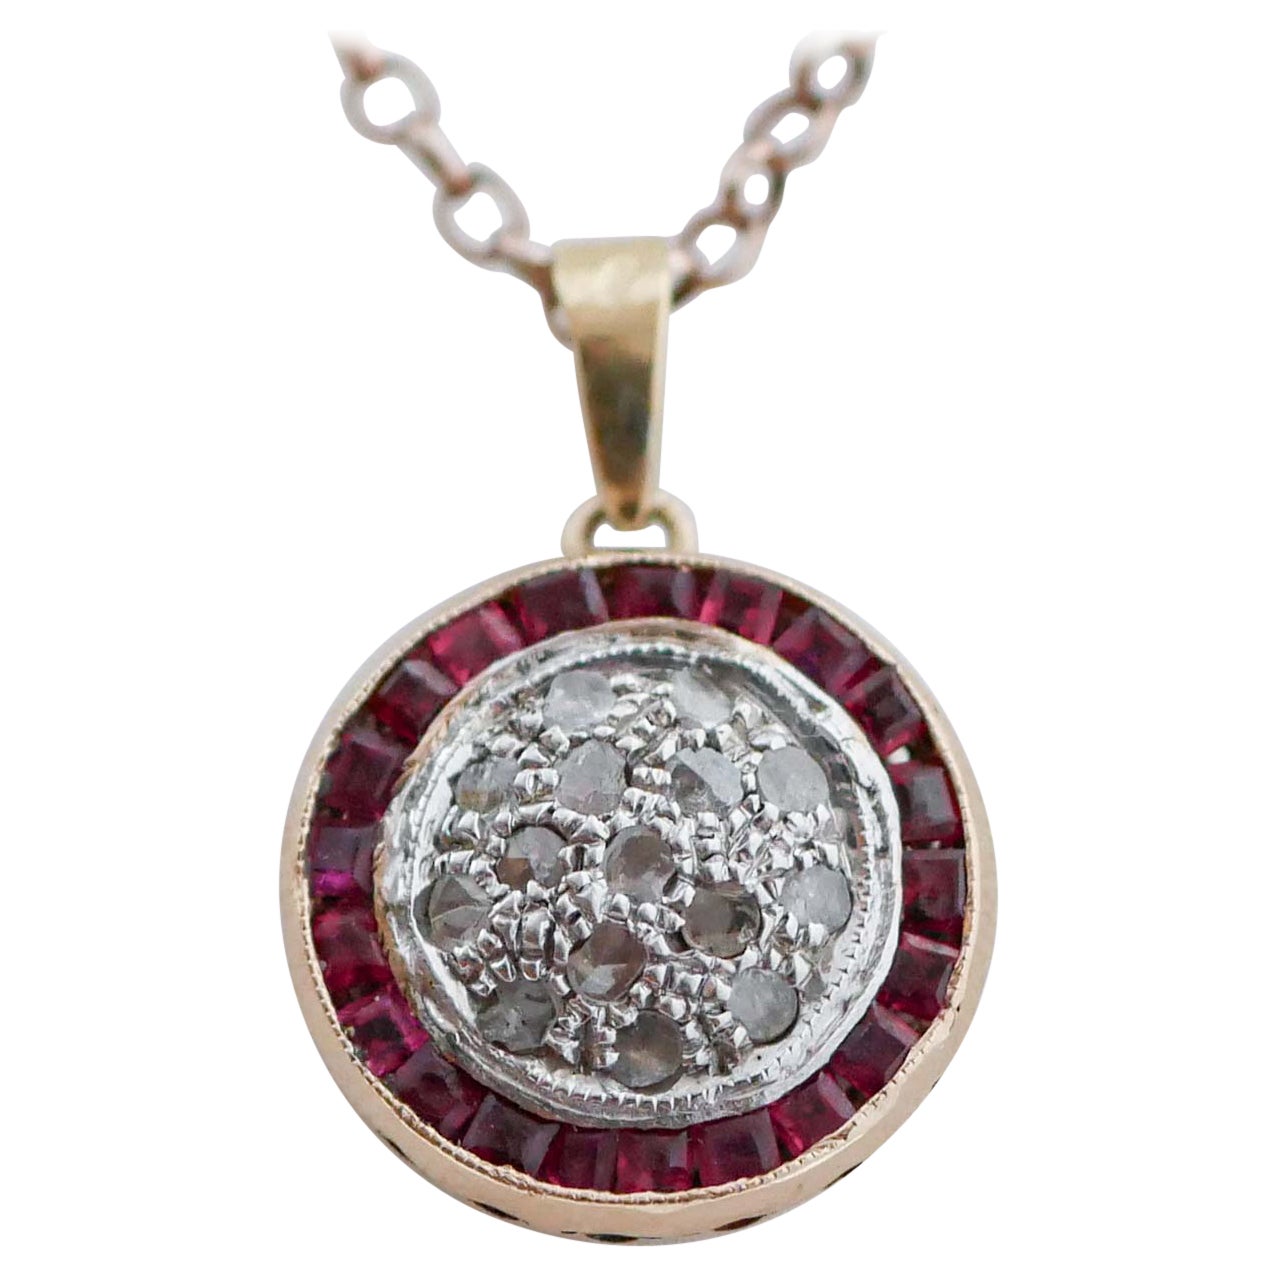 Rubies, Diamonds, Rose Gold and Silver Pendant Necklace.